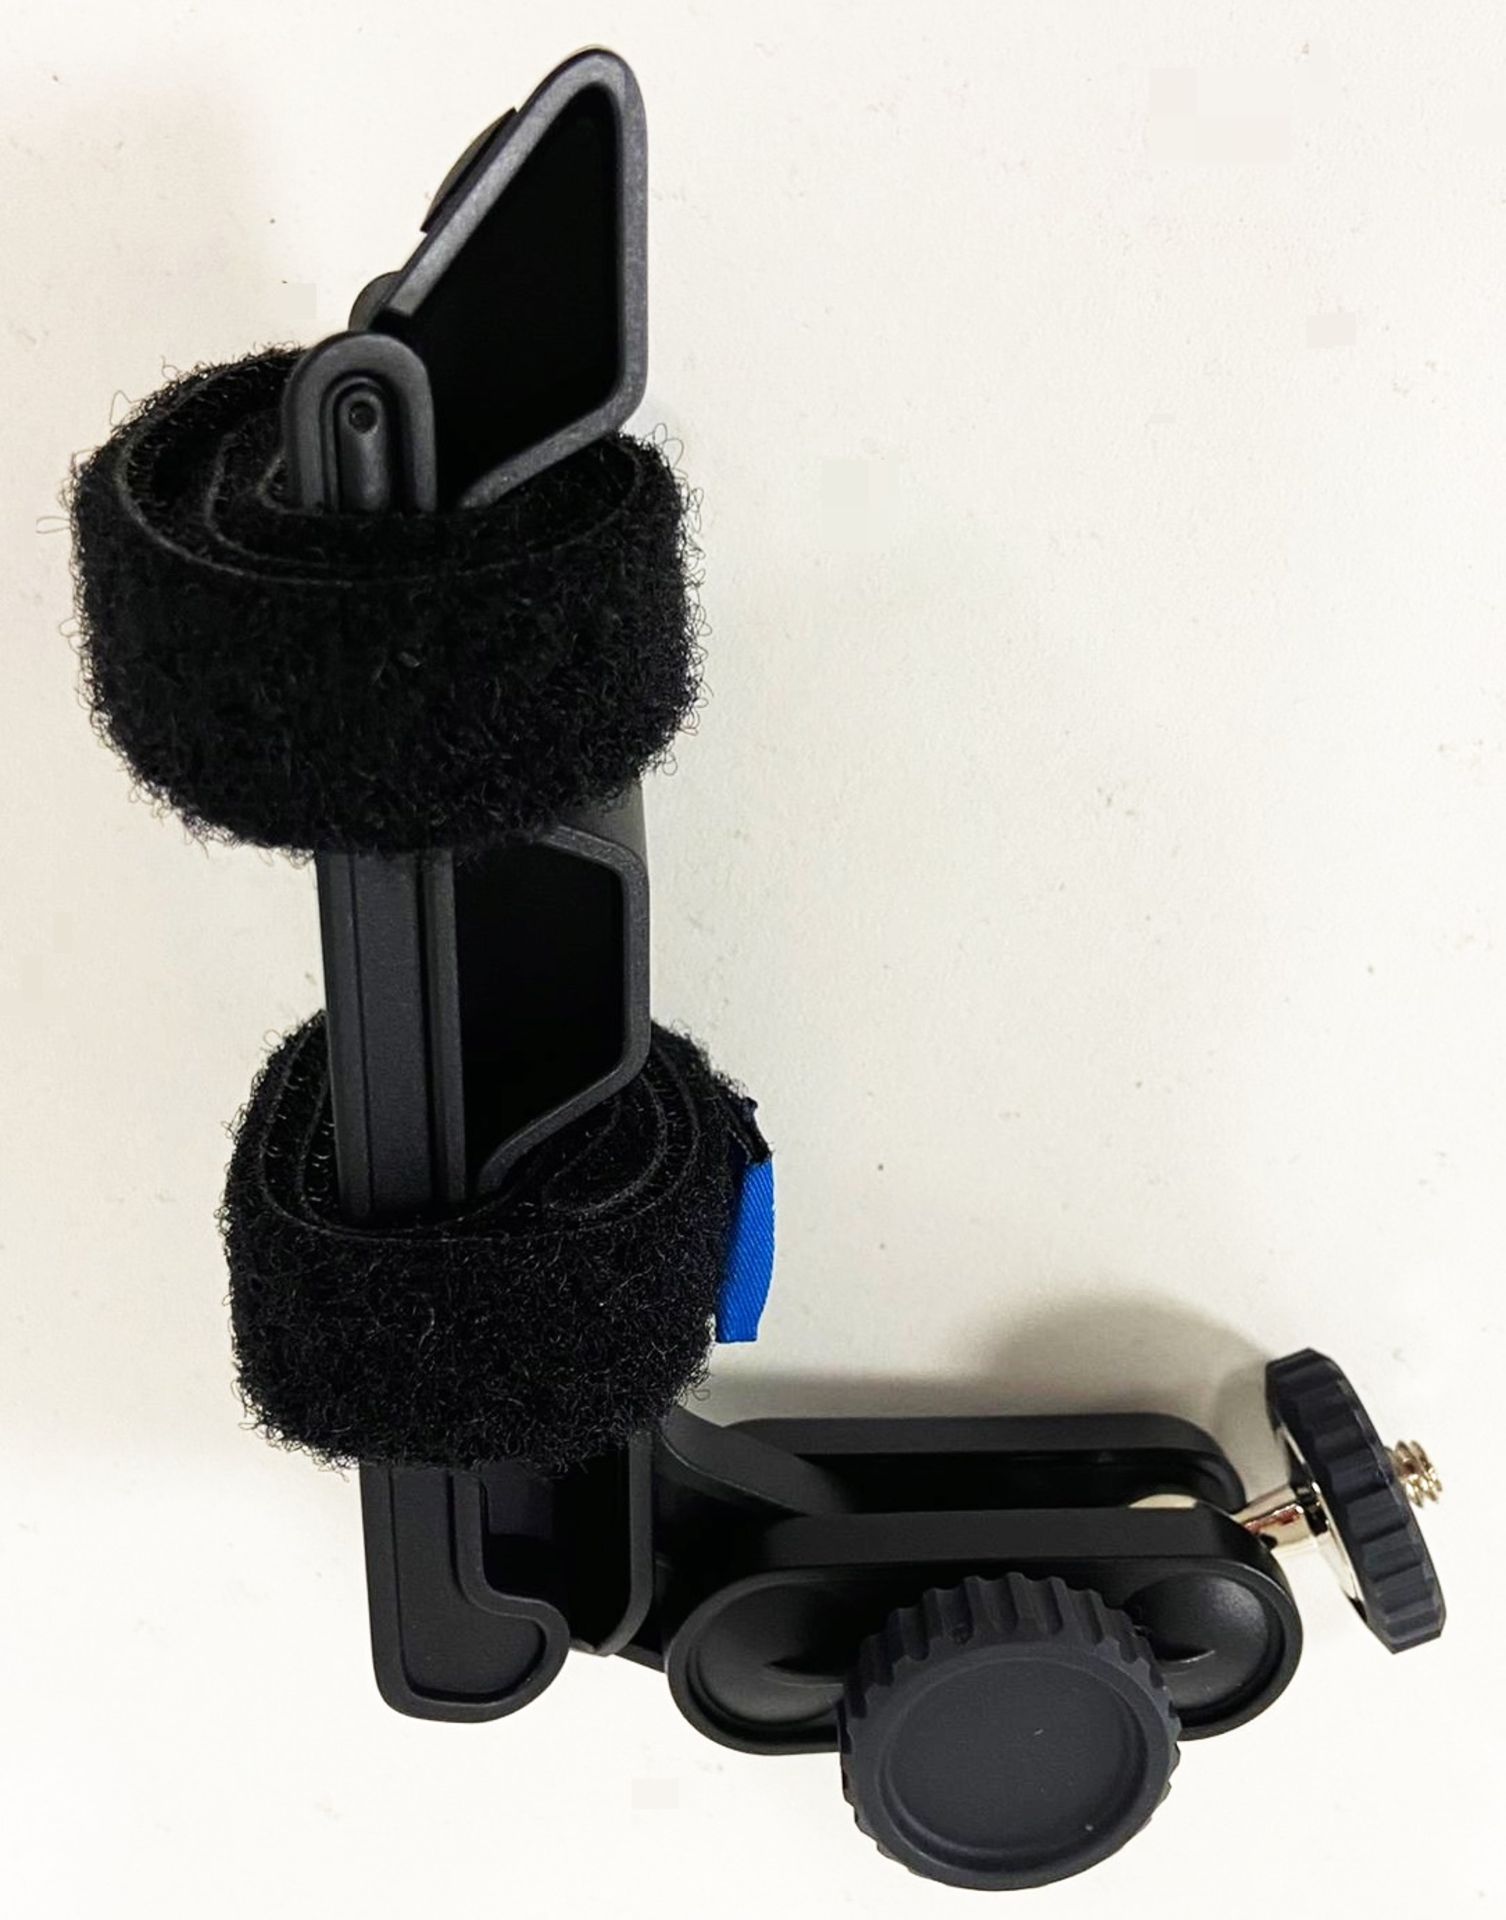 12 x CISCO Versatile Hand Free Flip Video Action Tripod For Your Camera - Image 3 of 3